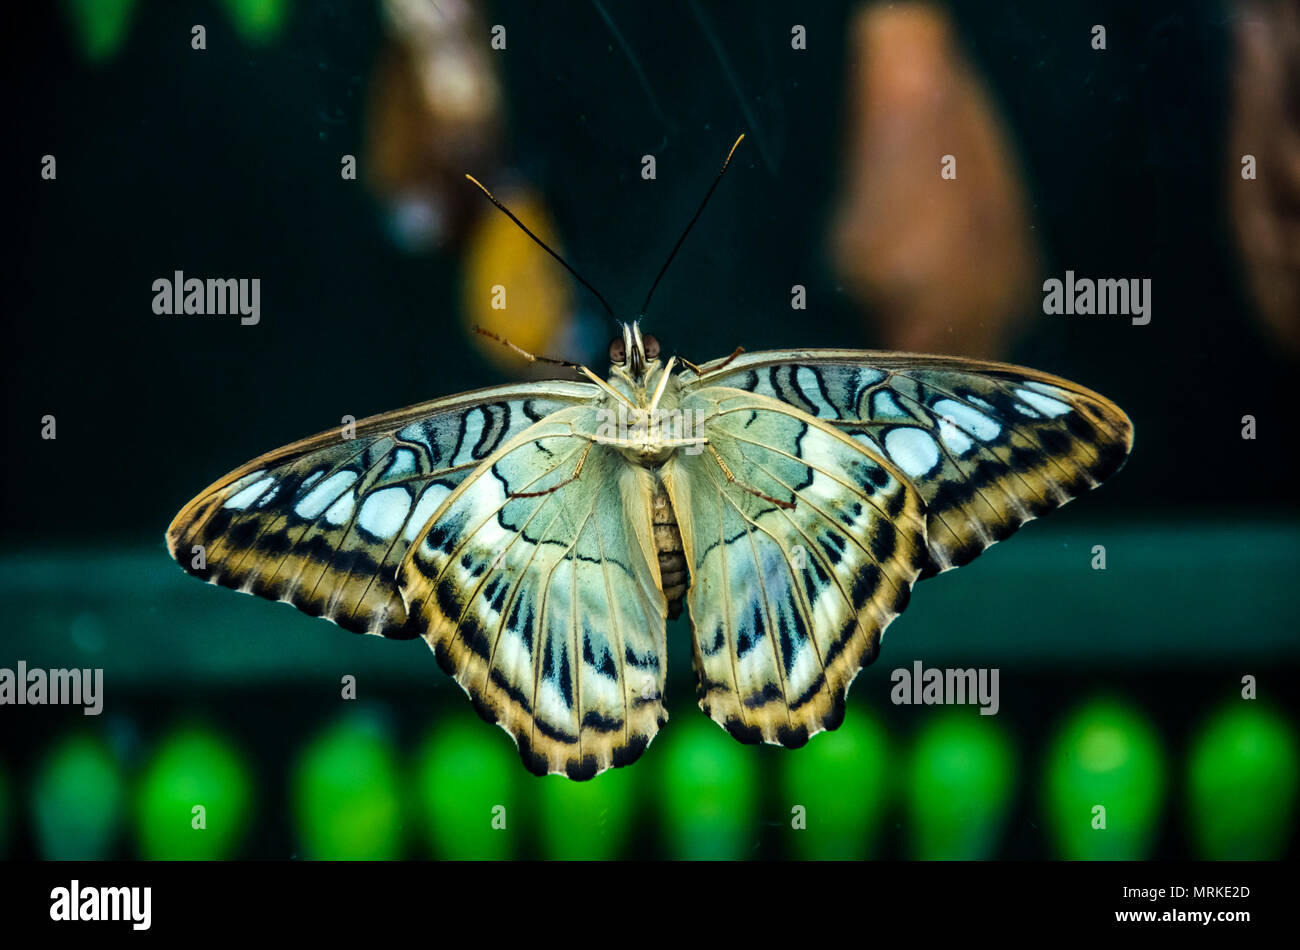 LONDON, UK - APRIL 4, 2018: A colorful butterfly with its wings spread in dark background at the exhibition features at Natural History Museum. Stock Photo